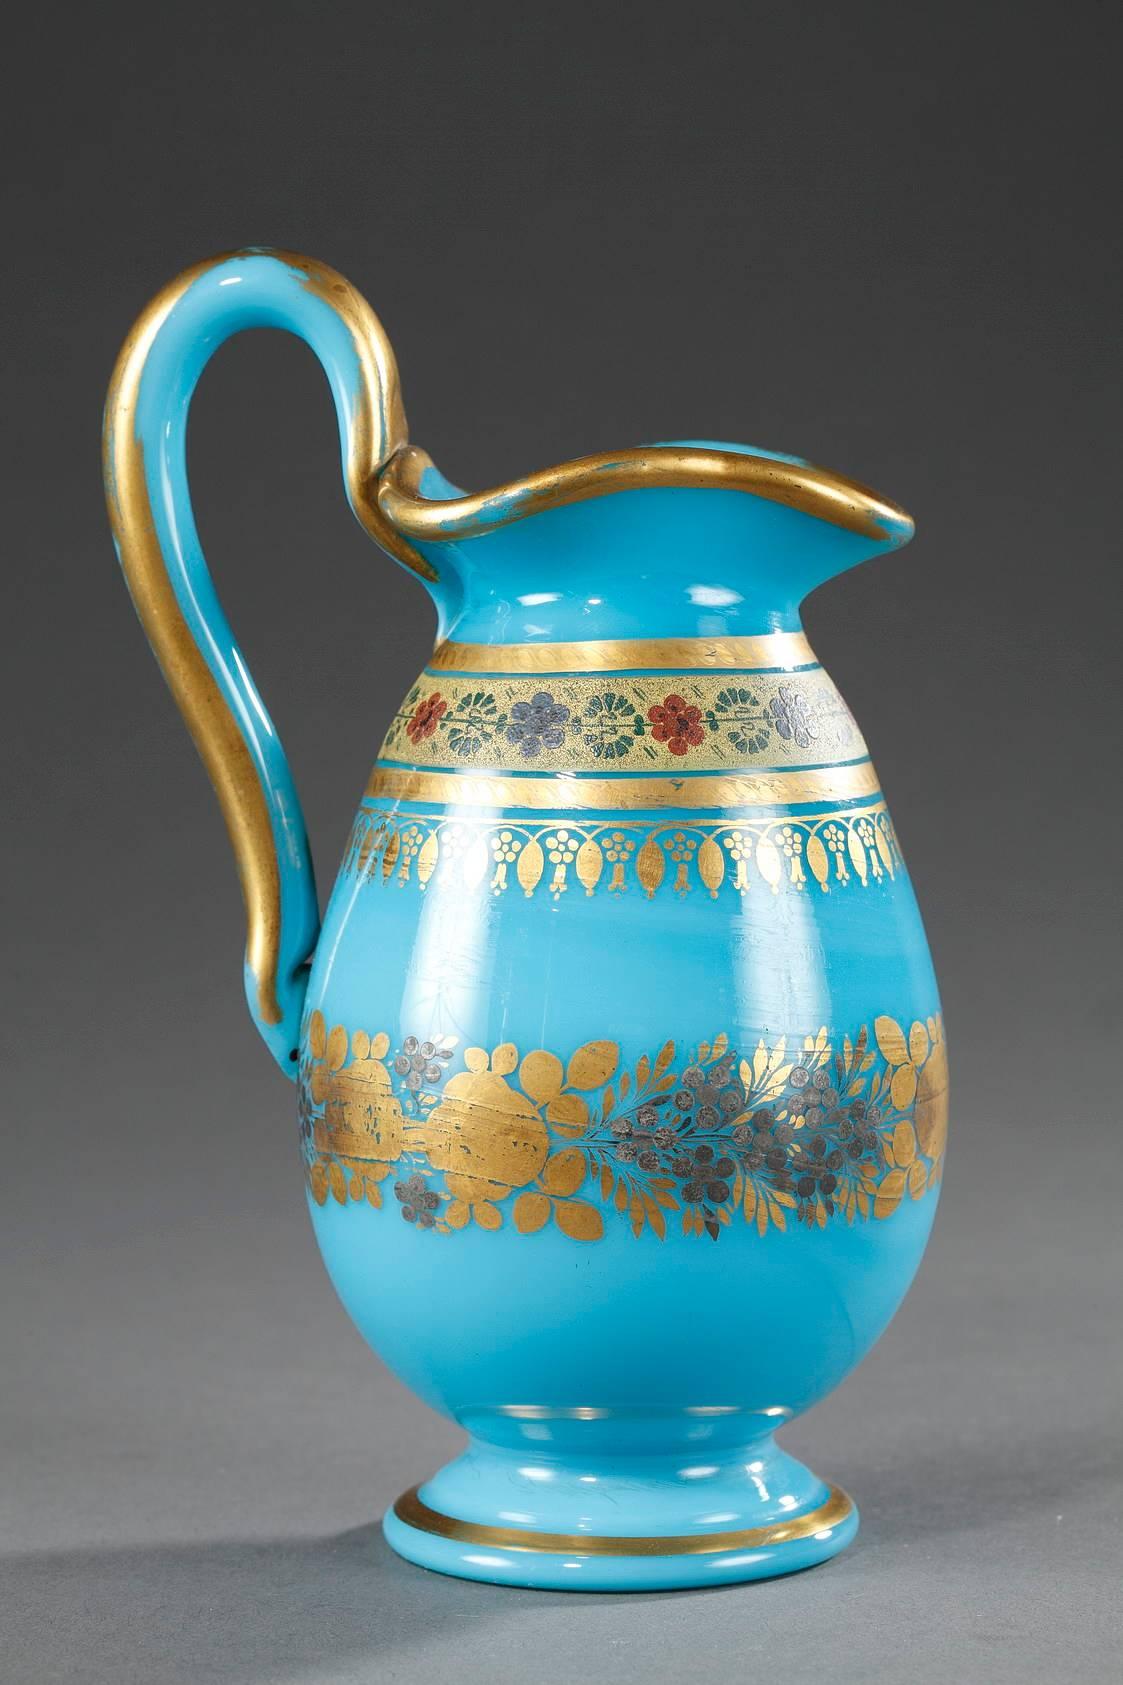 Restauration Bowl and Pitcher in Blue Opaline with Desvignes Decoration